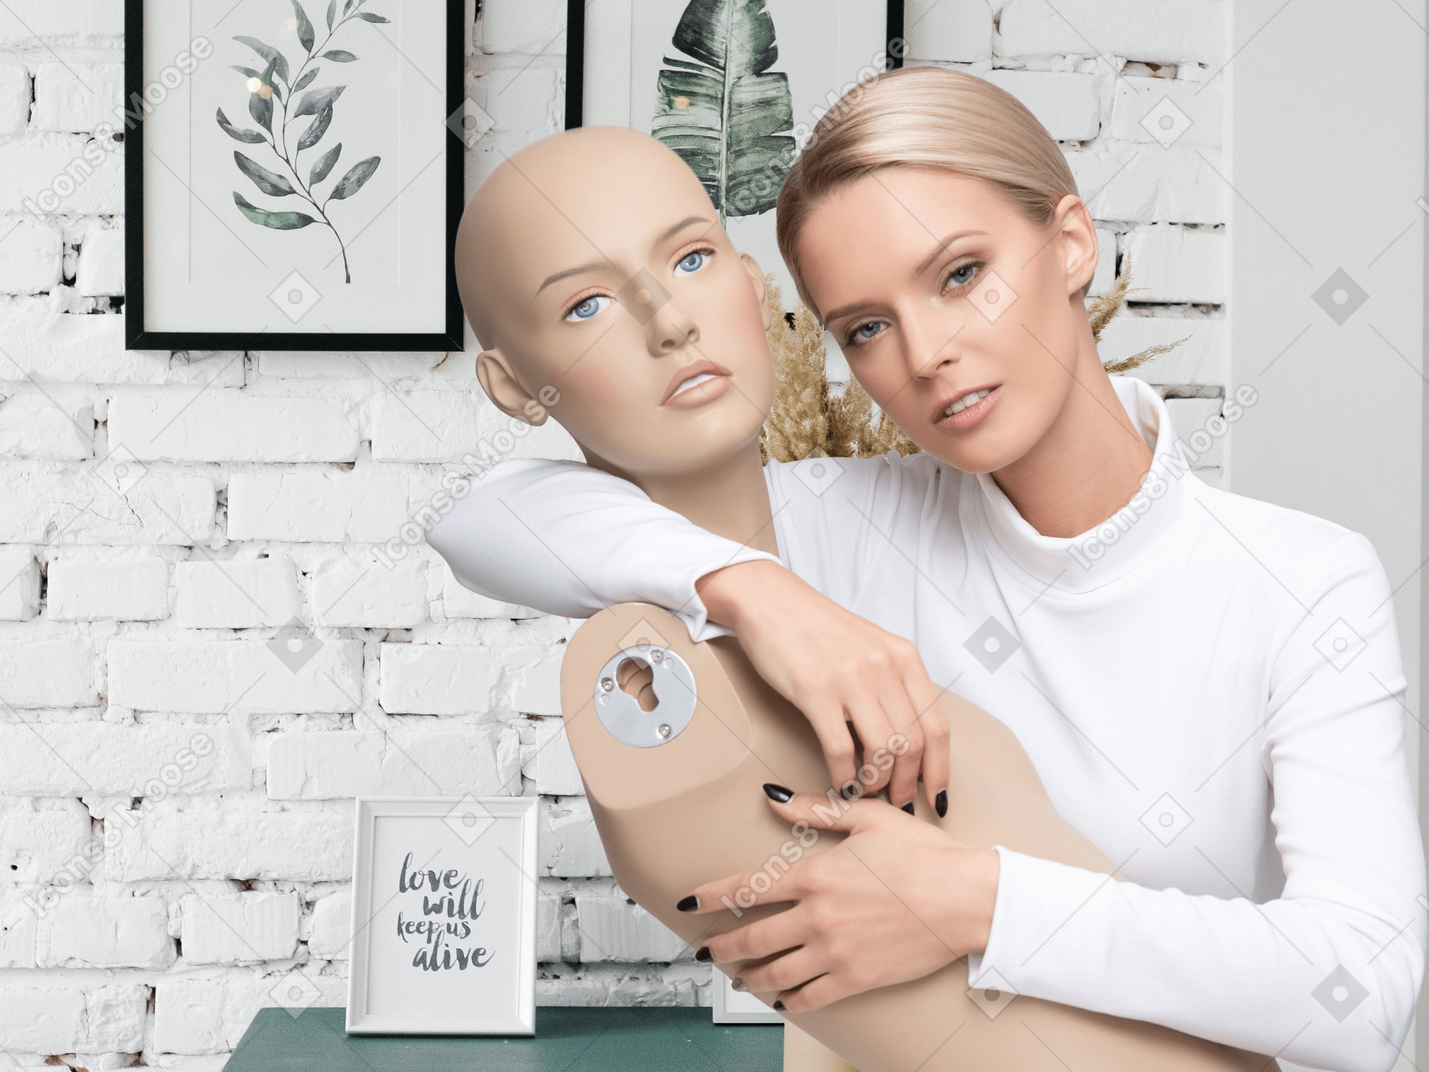 Woman in white top holding mannequin